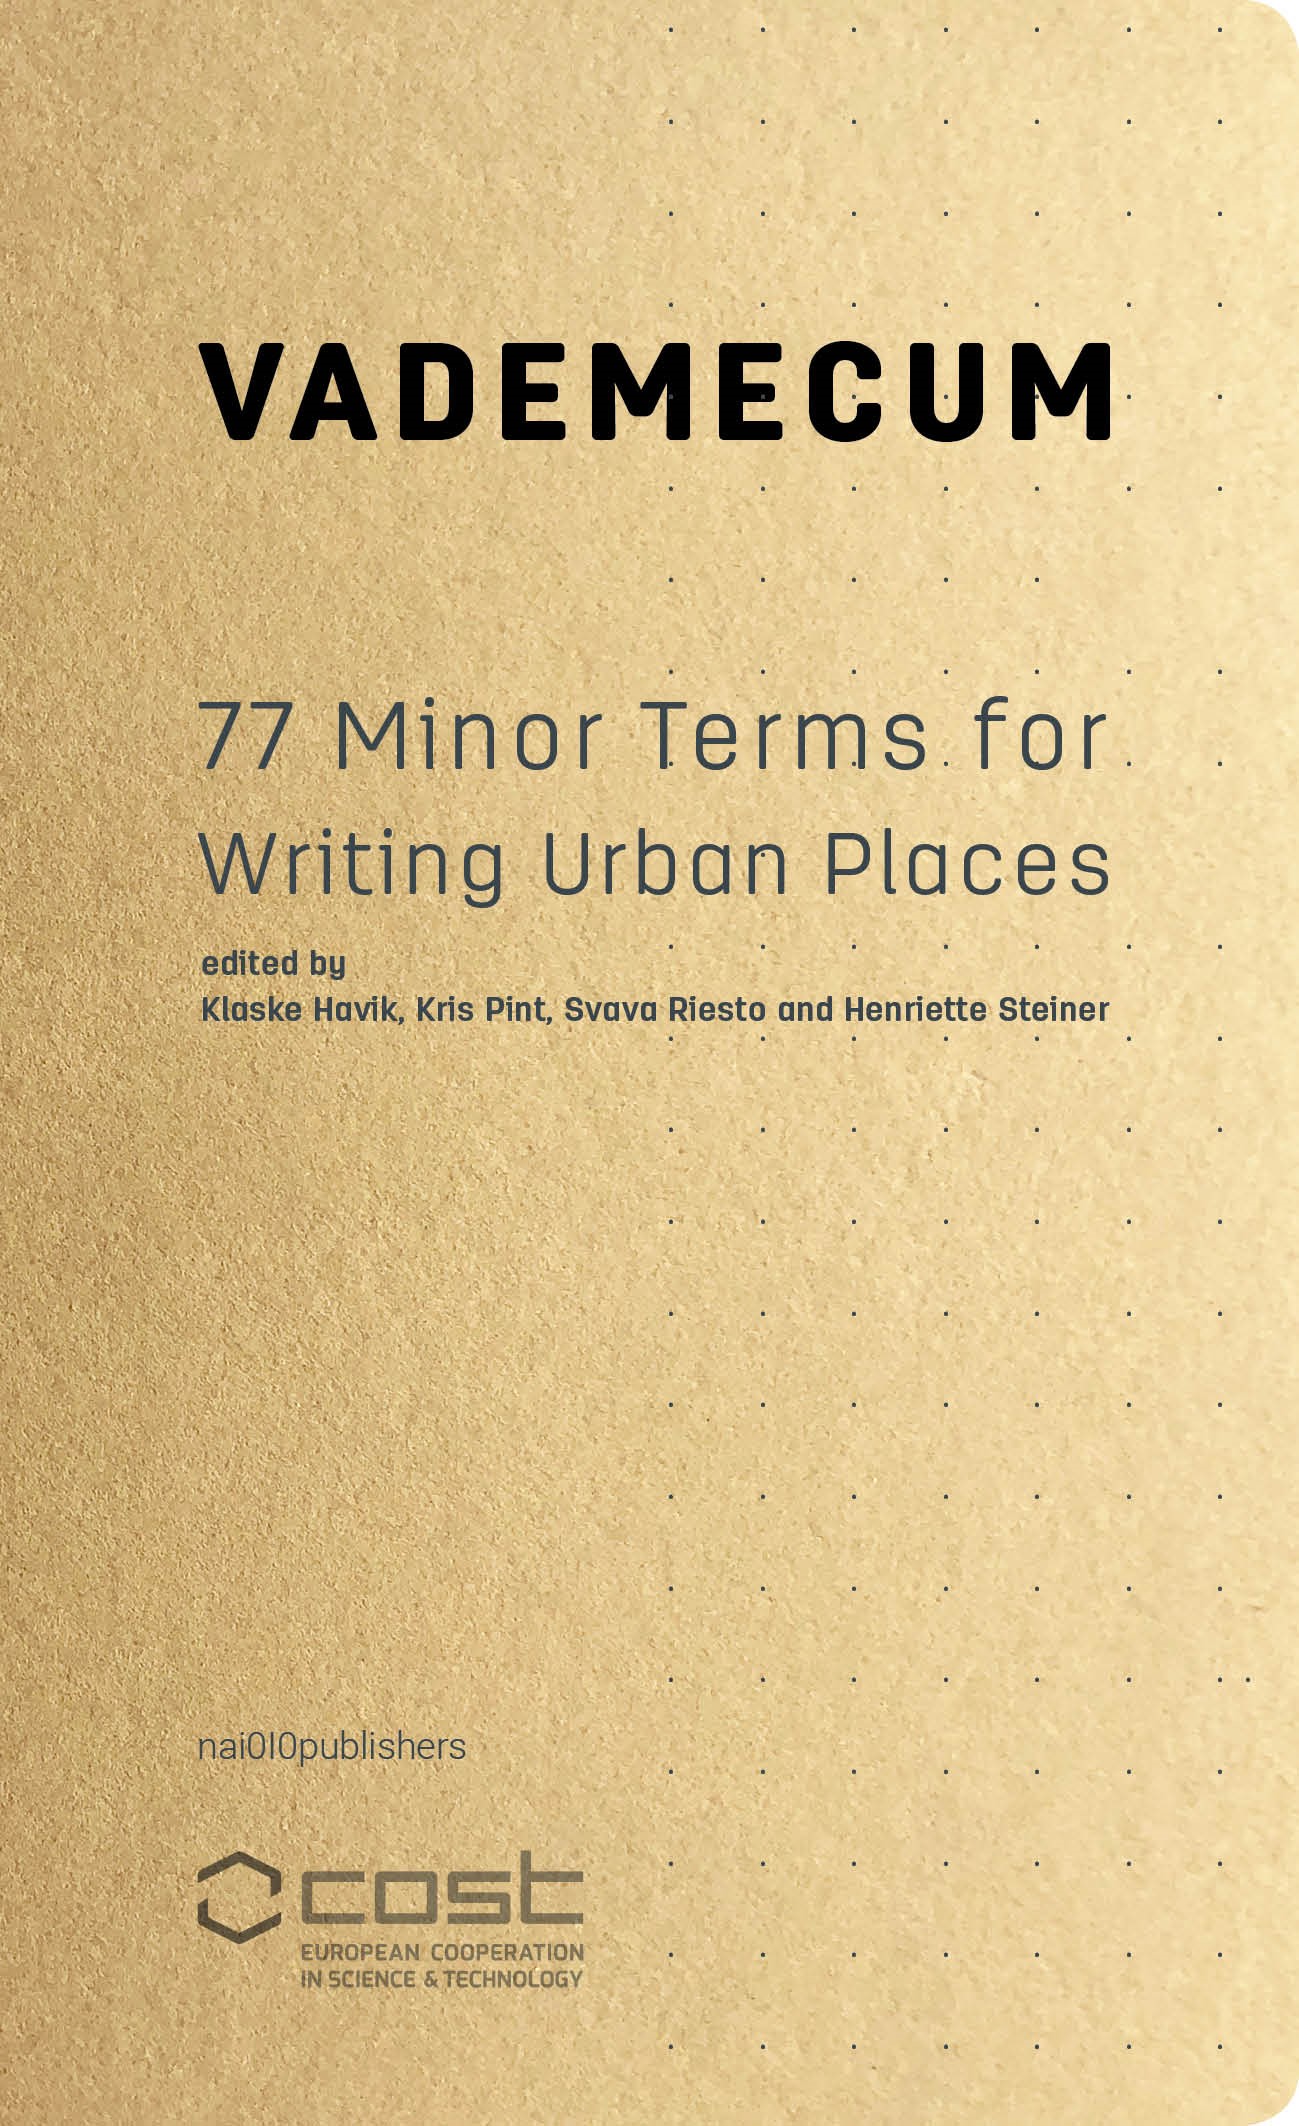 A Vademecum of One Hundred Minor Terms for Writing Urban Places (e-book)